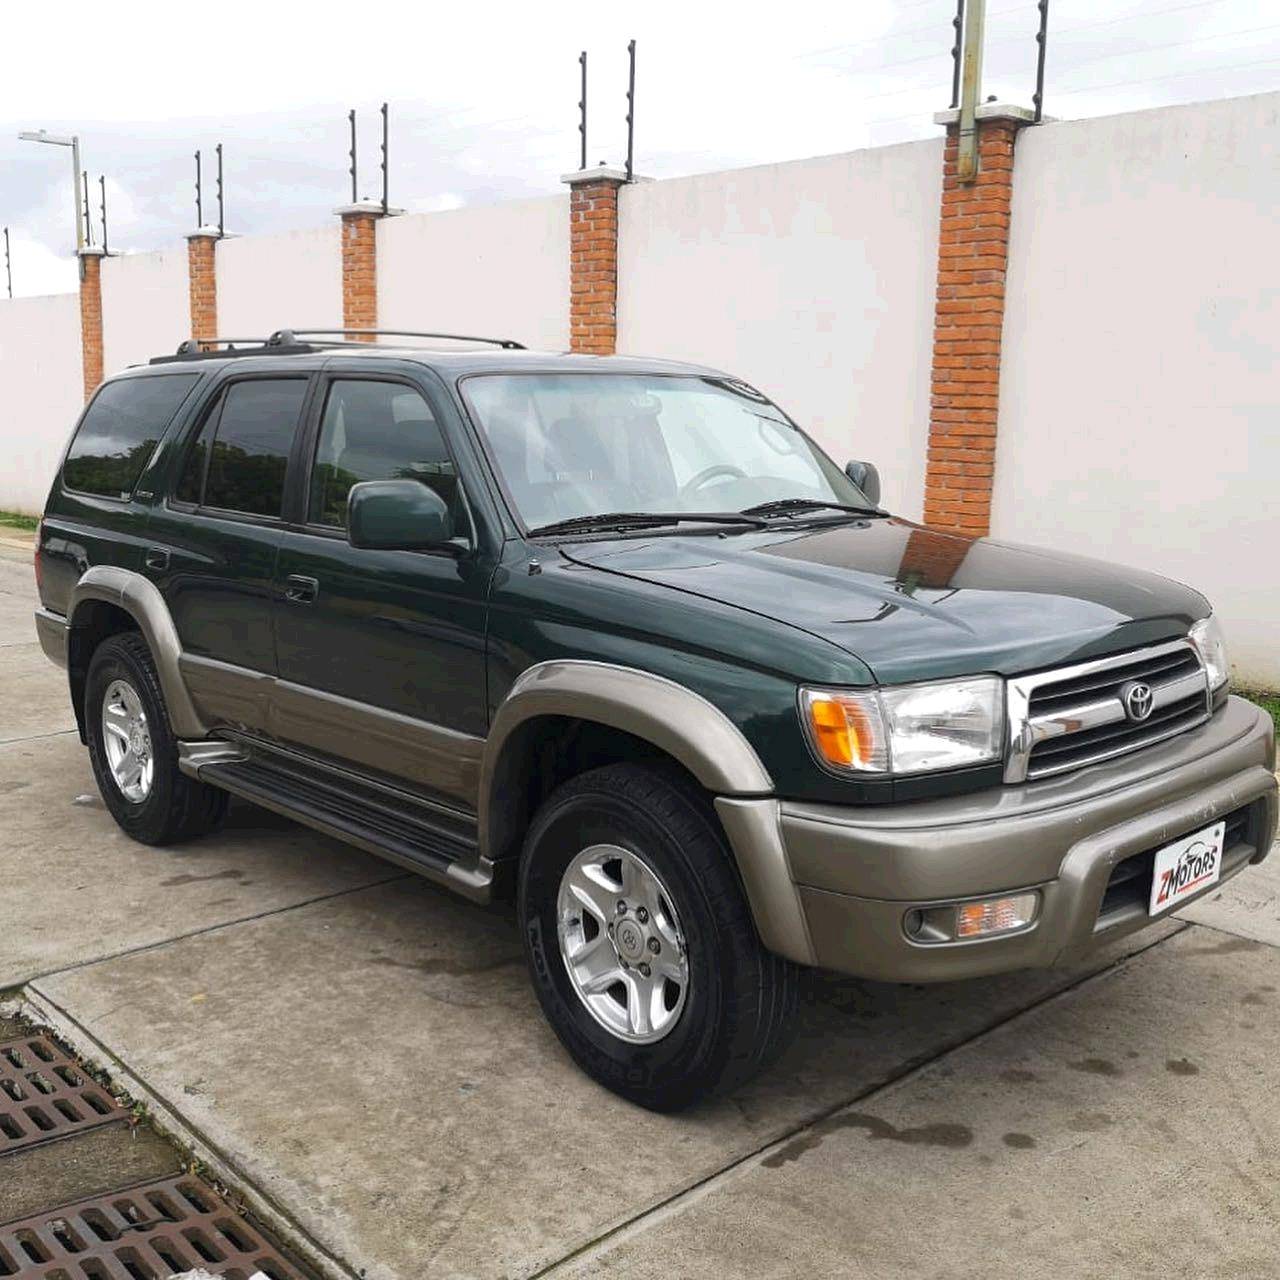 Share 86 About Toyota 4runner Limited 2000 Super Cool Indaotaonec